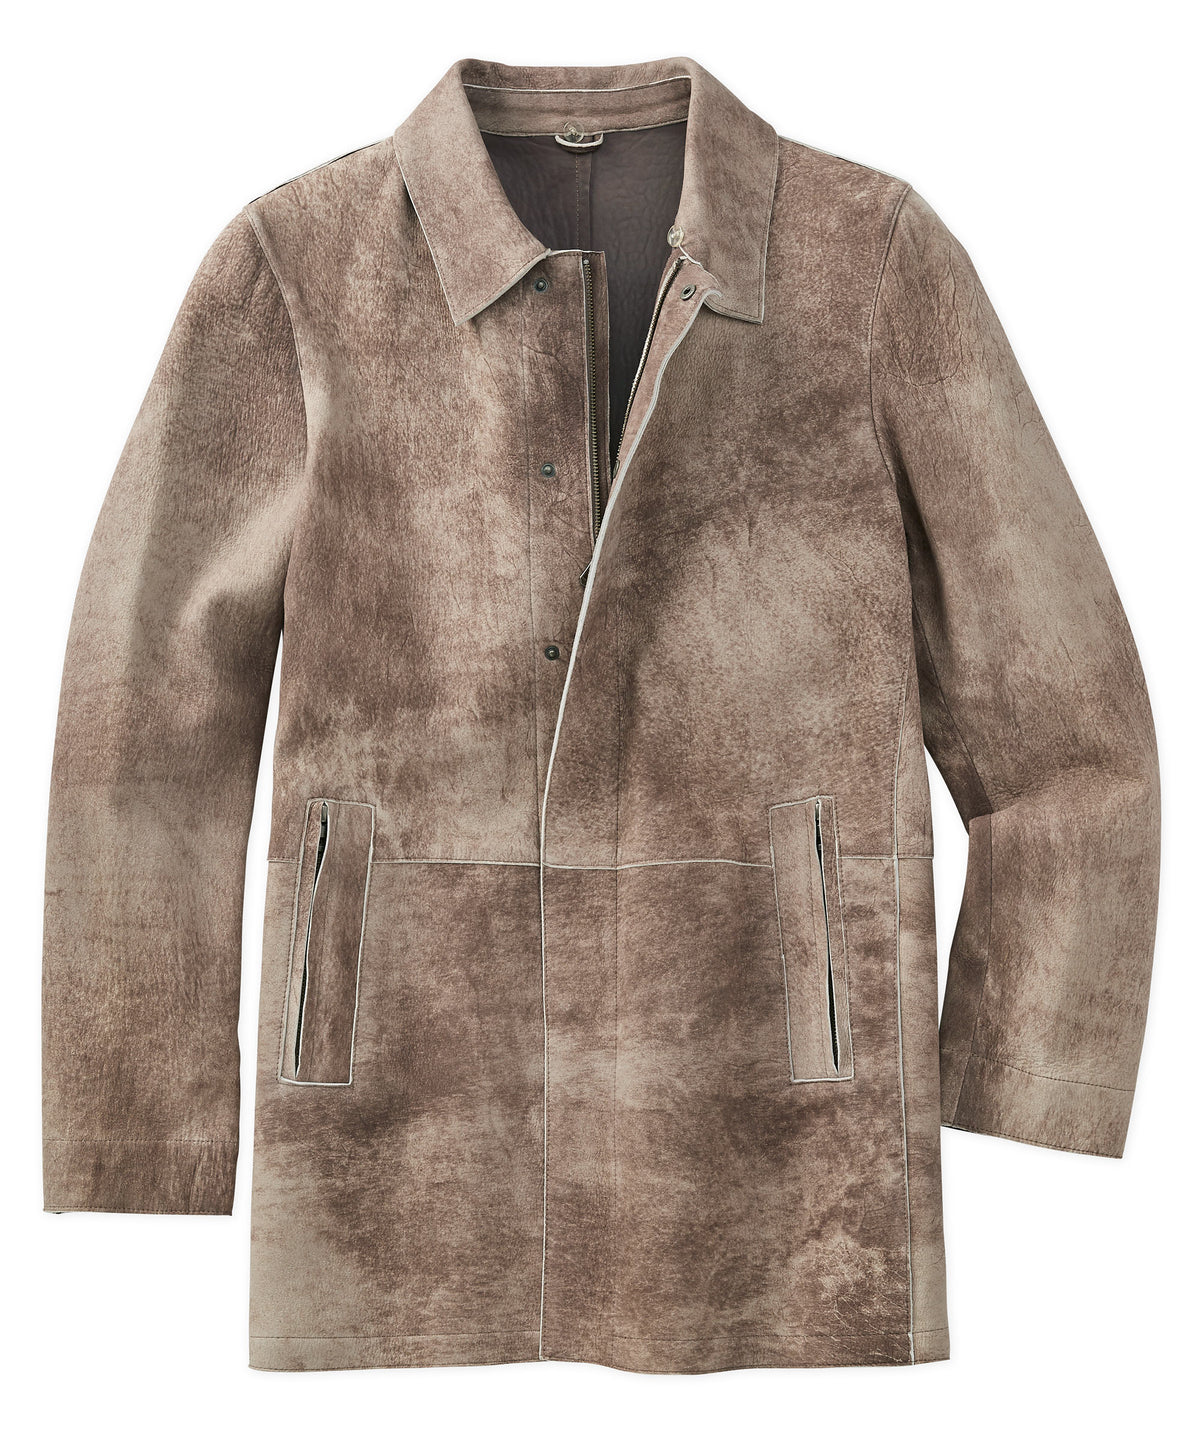 Lagoon Distressed Lambskin Leather Coat with Removable Collar